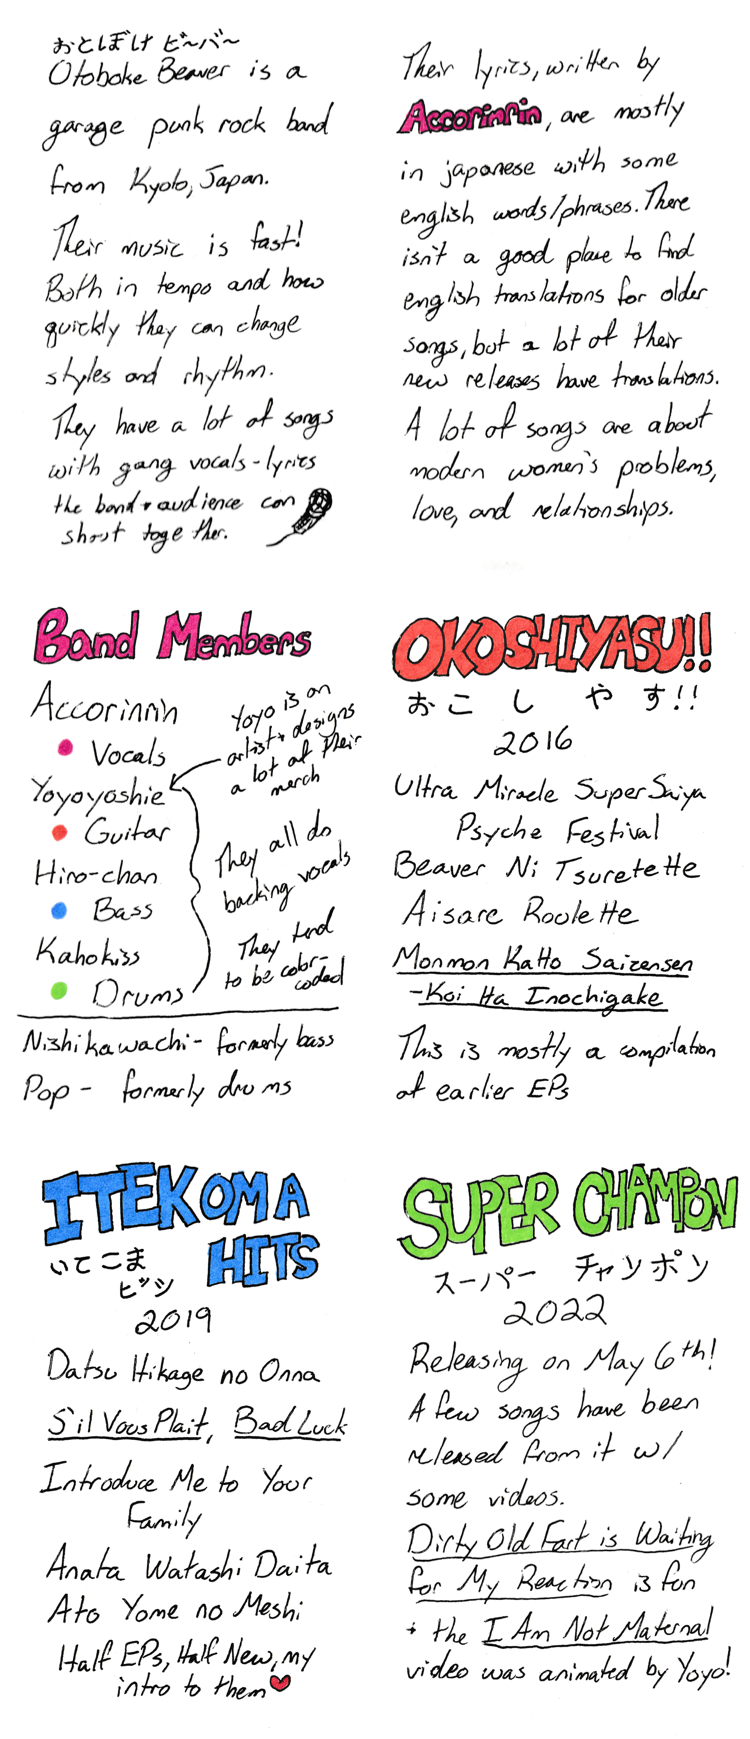 Hand written information and lists on a white background. The first section reads Otoboke Beaver is a garage punk rock band from Kyoto, Japan. Their music is fast! Both in tempo and how quickly they can change styles and rhythm. They have a lot of songs with gang vocals- lyracs the band and audience can shout together. There is a digital drawing of a microphone. Their lyrics, written by Accorinrin, are mostly in japanese with some english words/phrases. There isn't a good place to find english translations for older songs, but a lot of their new releases have translations. A lot of songs are about modern women's problems, love, and relationships. The second section reads: Band Members in pink bubble letters. Accorinrin, pink, vocals, Yoyoyoshie, orange, guitar, Hiro-chan, blue, bass, Kahokiss, green, drums. Several notes read Yoyo is an artist and designs a lot of their merch, they all do backing vocals, and they tend to be color coded. Nishikawachi, formerly bass, and Pop, formerly drums are also listed. Okoshiyasu!! in orange bubble letters with japanese kana underneath and 2016. Song titles Ultra Miracle Super Saiya Psyche Festival, Beaver Ni Tsurette, Aisare Roulette, and underlined Monmon Katto Saizensen - Koi Ha Inochigake are listed. This is mstly a compilation of earlier EPs. The third section reads Itekoma Hits in blue bubble letters with japanese kana underneath and 2019. The songs Datsu Hikage no Onna, S'il Vous, Bad Luck, aIntrodue Me to Your Family, and Anata Watashi Daita Ato Yome no Meshi are listed. Half EPs, Half New, my intro to them with a small heart next to it. Super Champon in green bubble letters with japanese kana and 2022 underneath. Releasing on May 6th! A few songs have been released from it with some videos. Dirty Old Fart is Waiting for My Reaction is fun and the I Am Not Maternal video was animated by Yoyo!